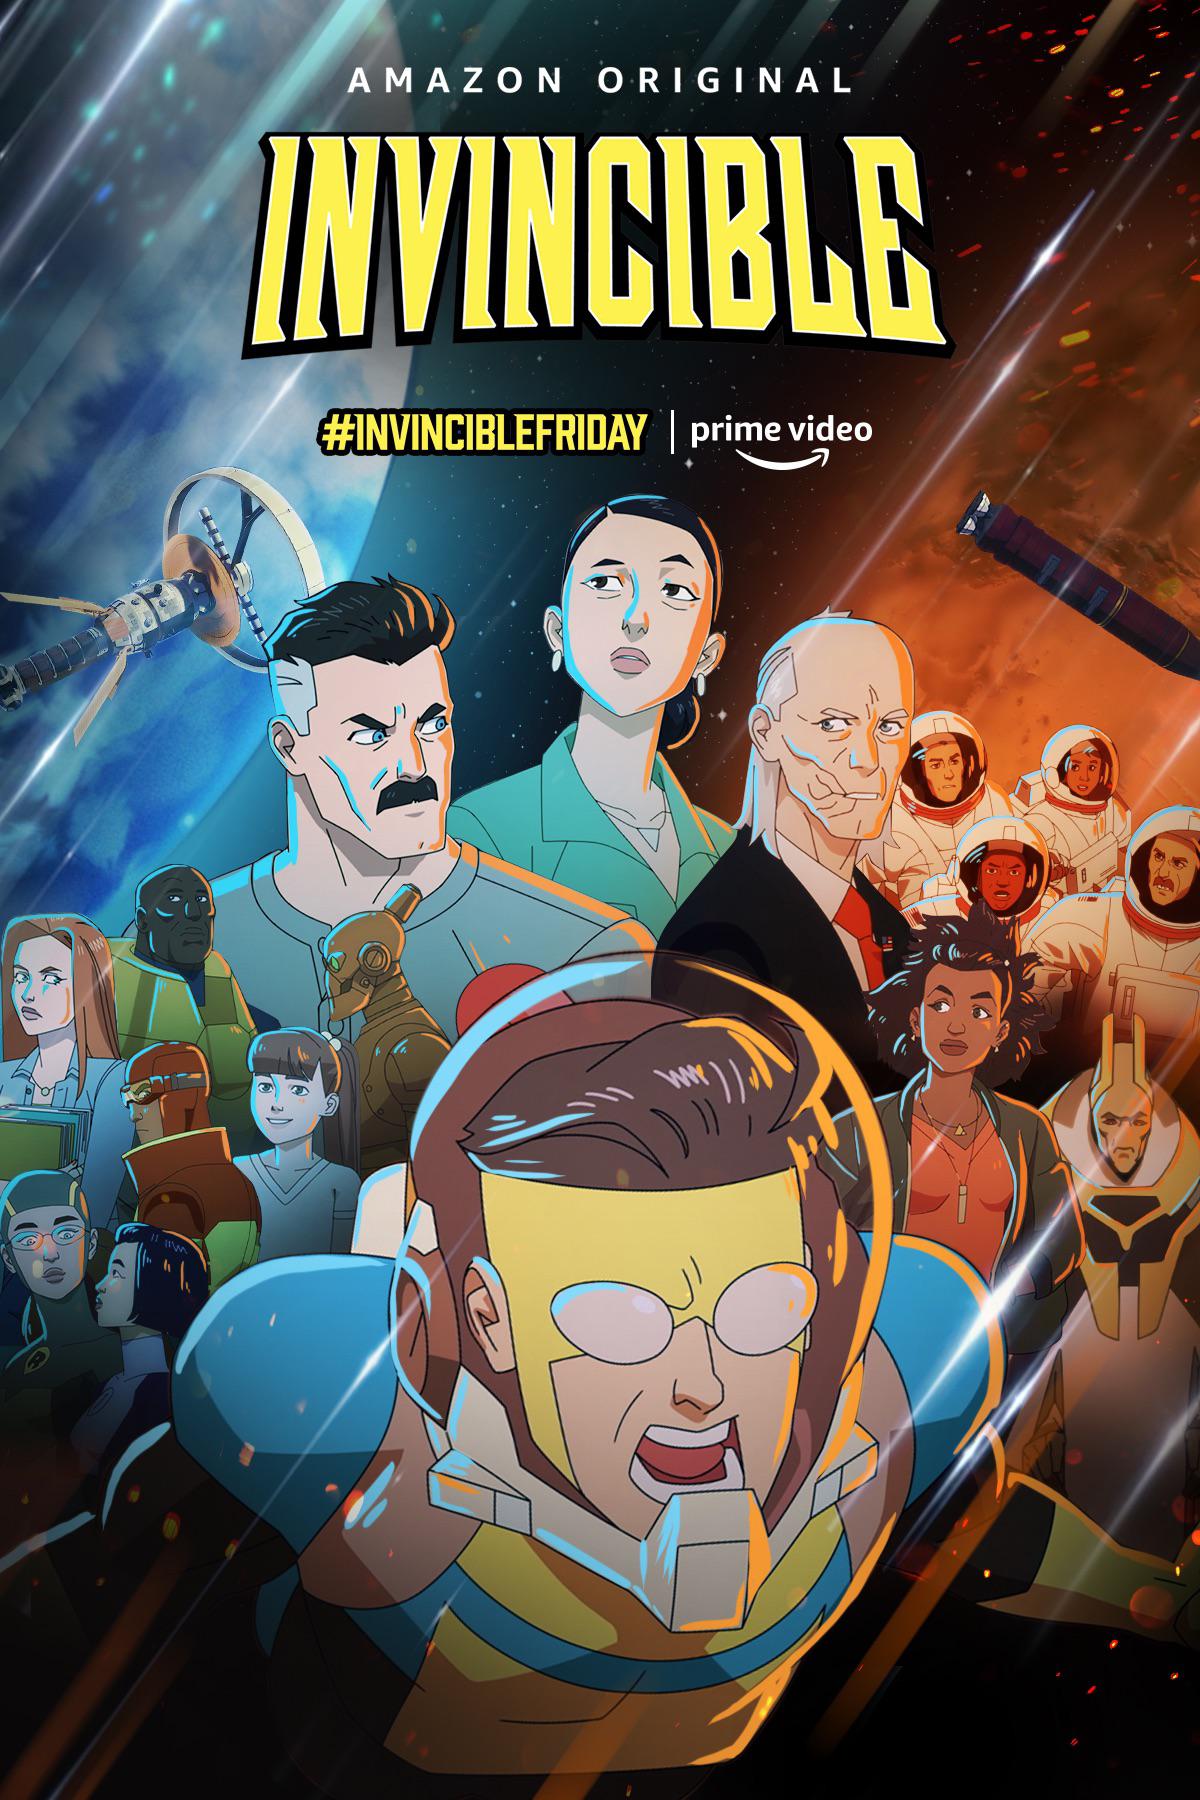 Invincible (a Titles & Air Dates Guide)